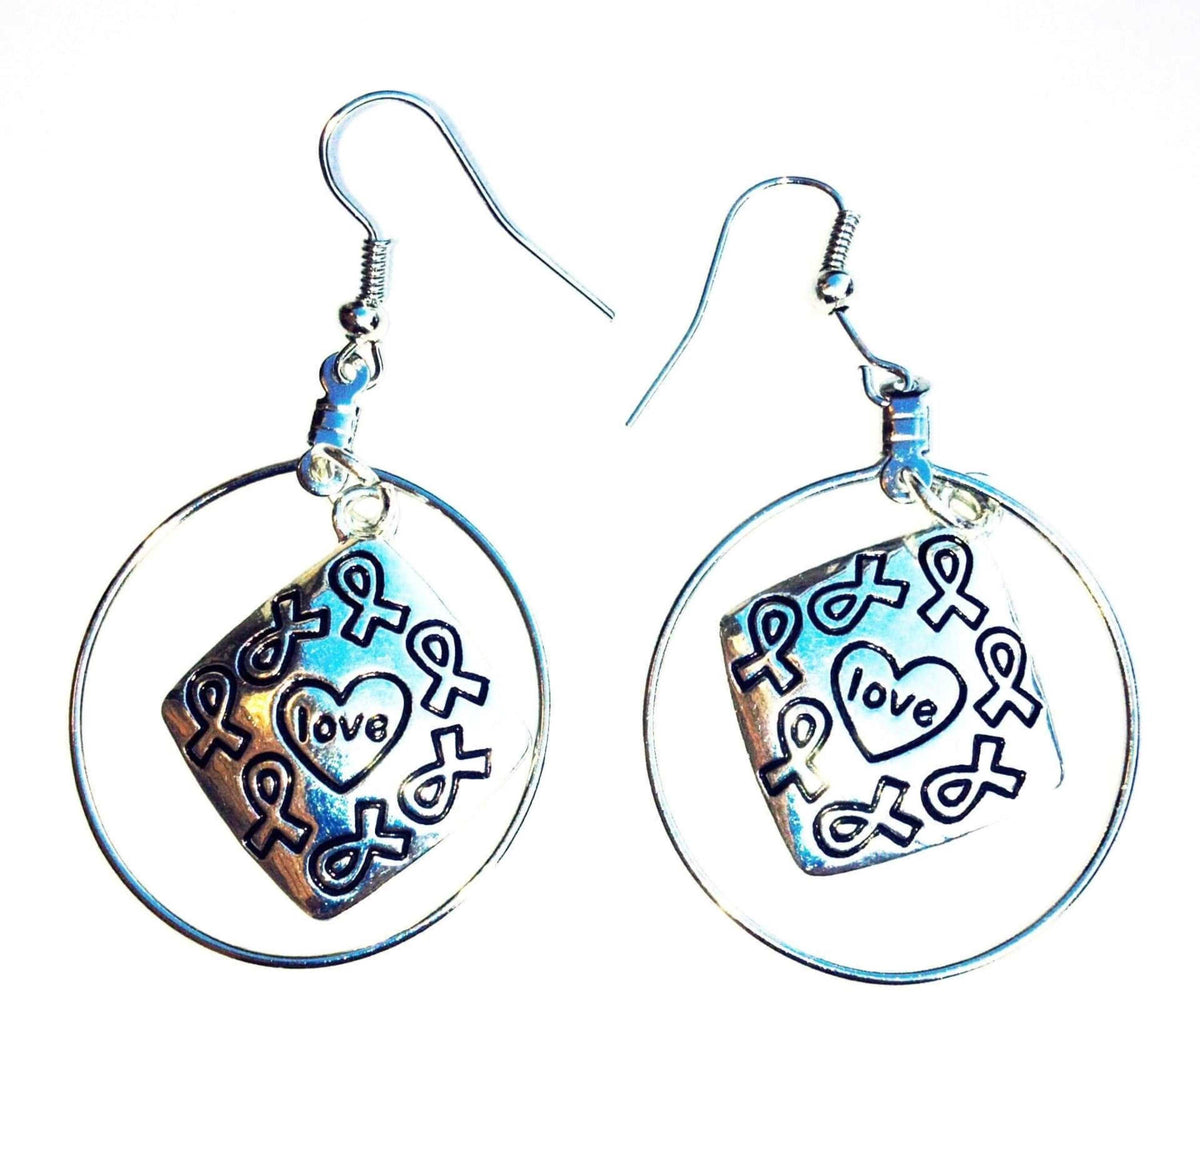 All Cause Love Charm Earrings with Medium Hoops - The House of Awareness